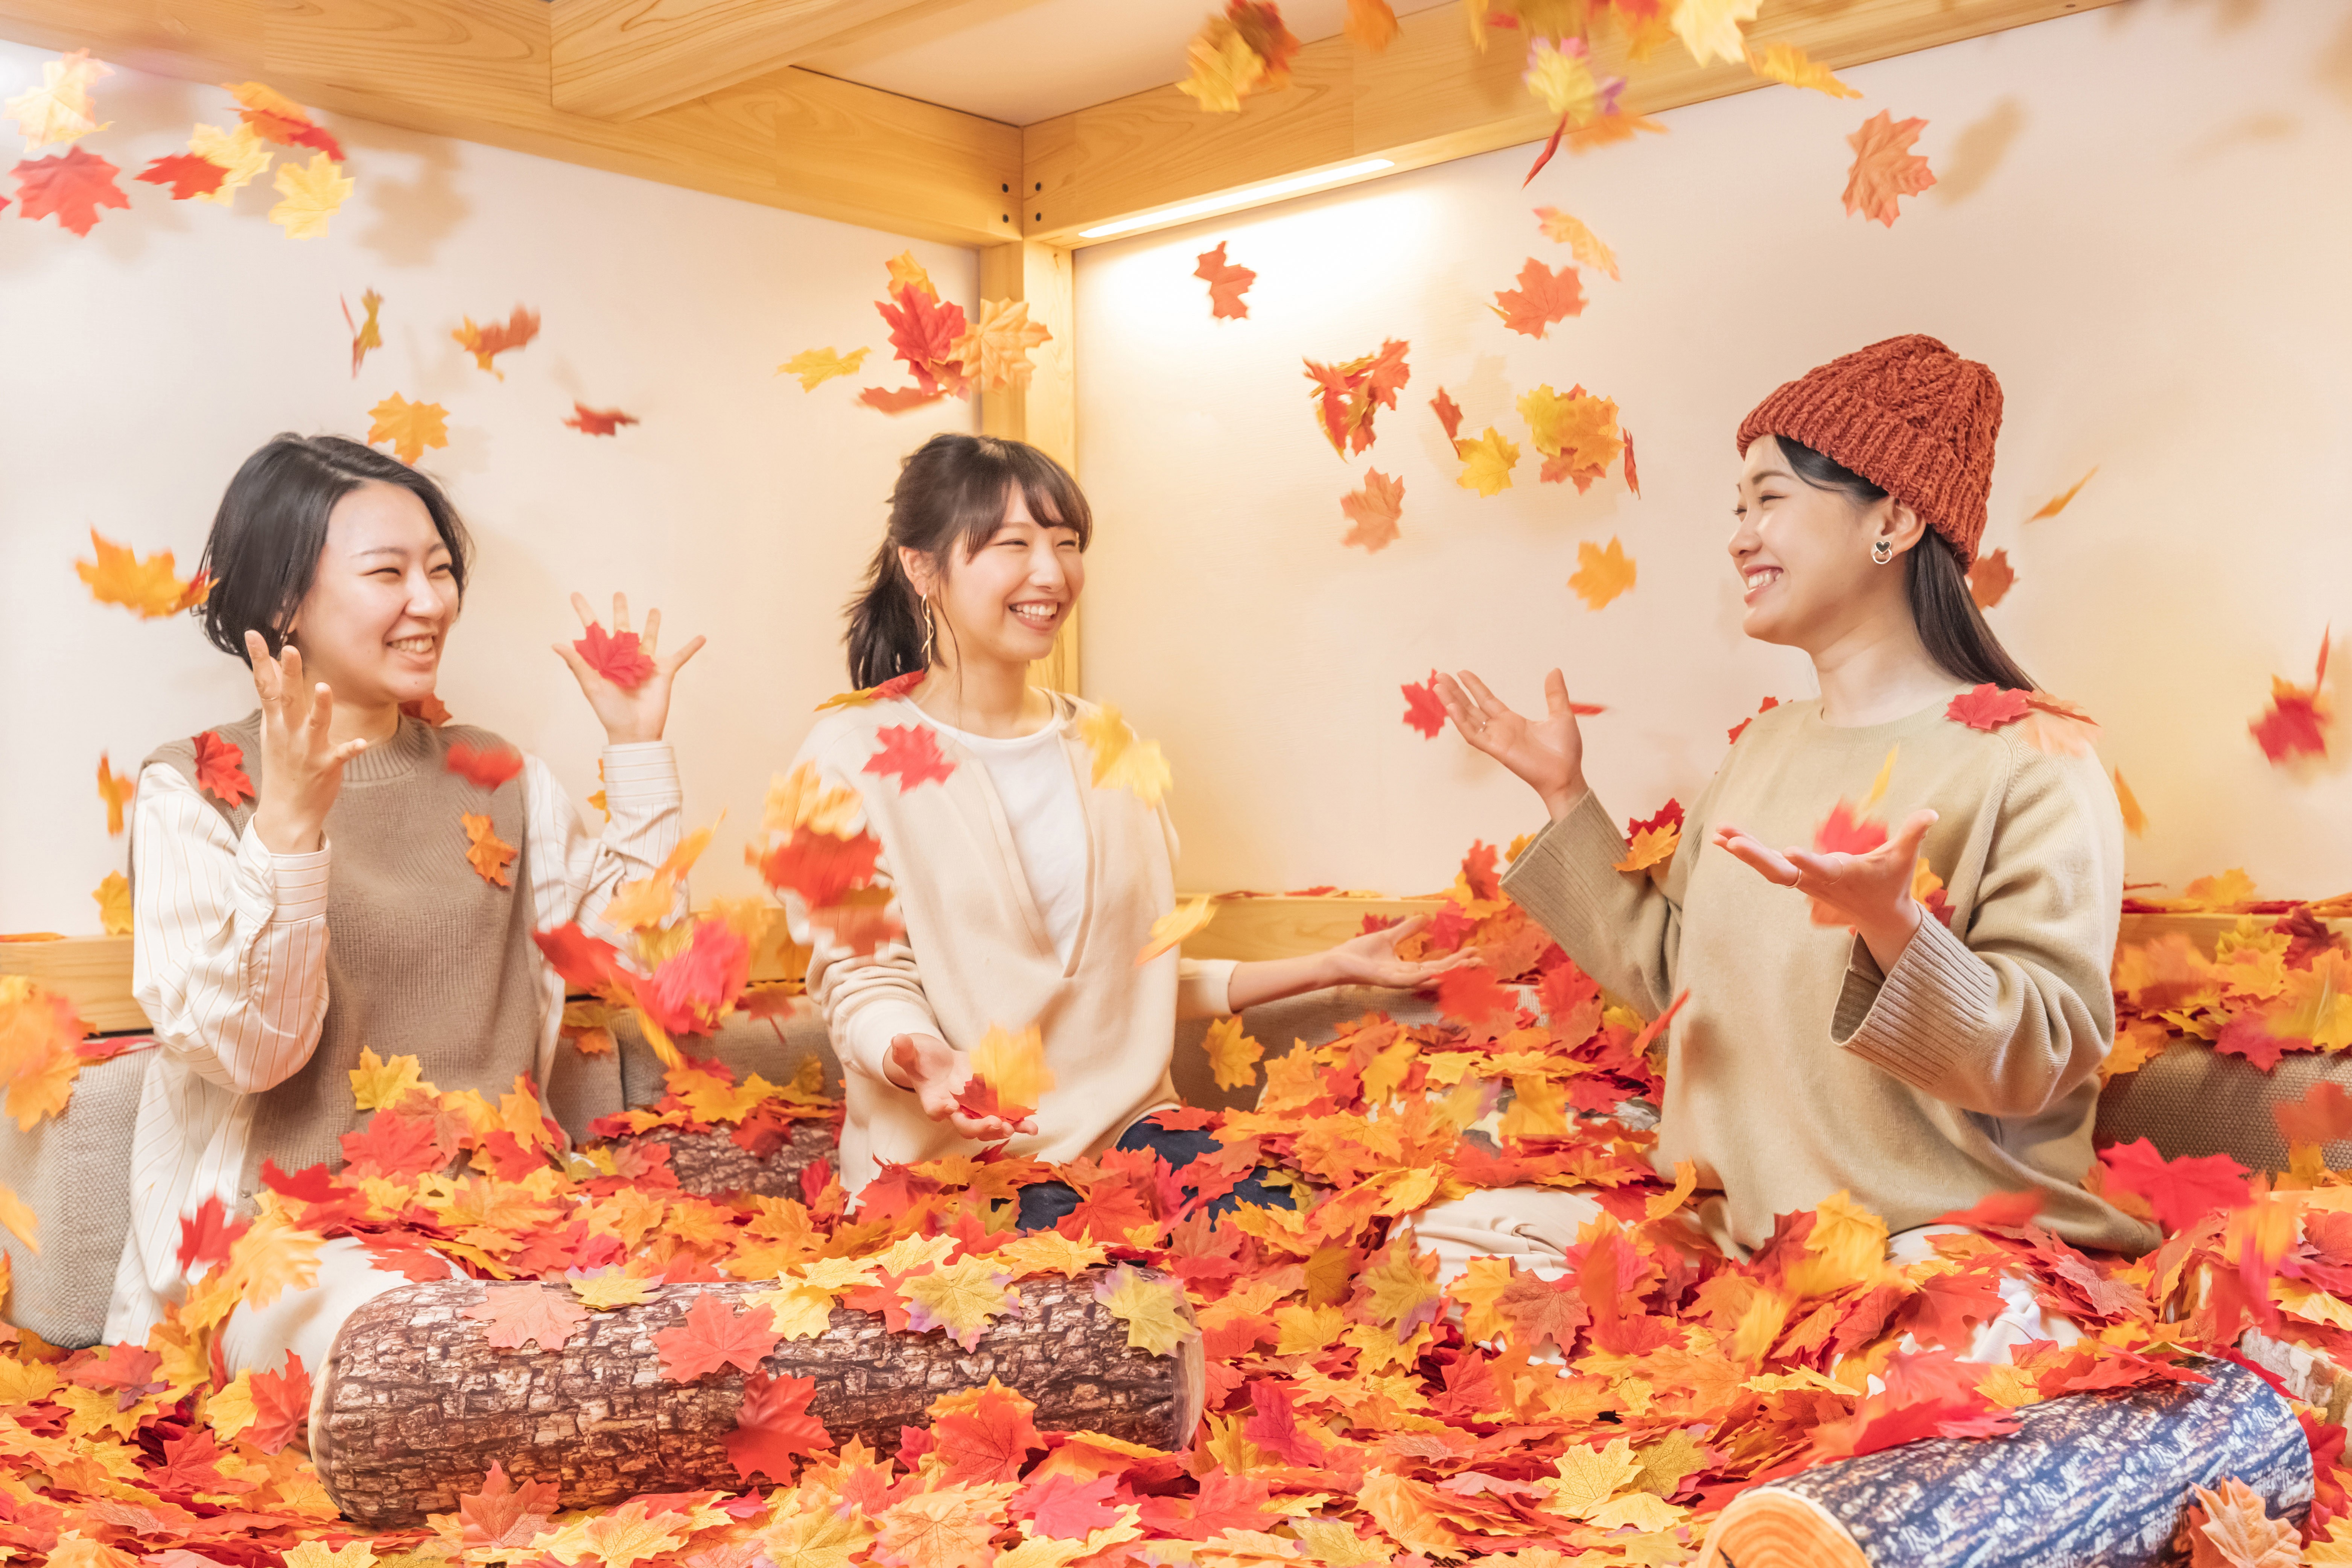 【Autumn Leaves x Accommodation】Hoshino Resorts BEB5 Karuizawa: A Hotel Stay with Autumn Leaves Outside, Inside, and as Food